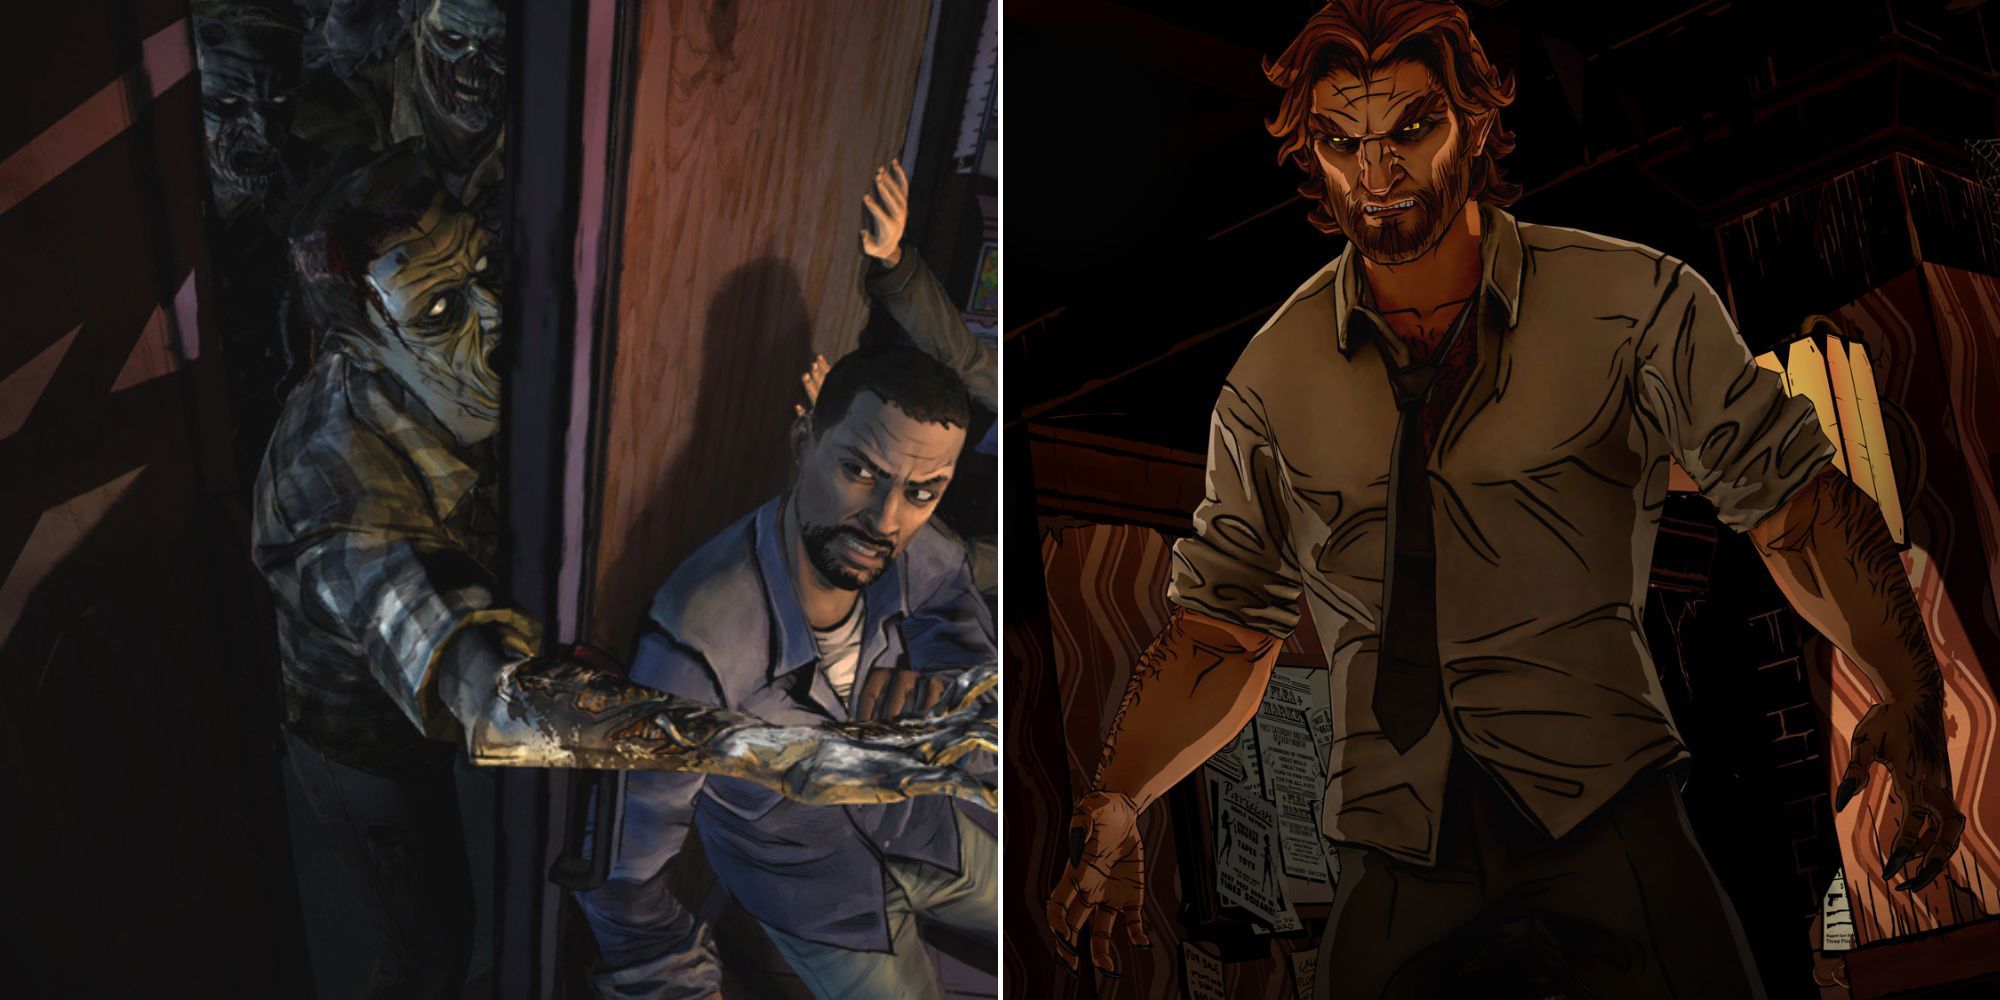 Lee Holding A Door To Stop Zombies In Telltale's The Walking Dead - Bigby Getting Angry In Telltale's The Wolf Among Us